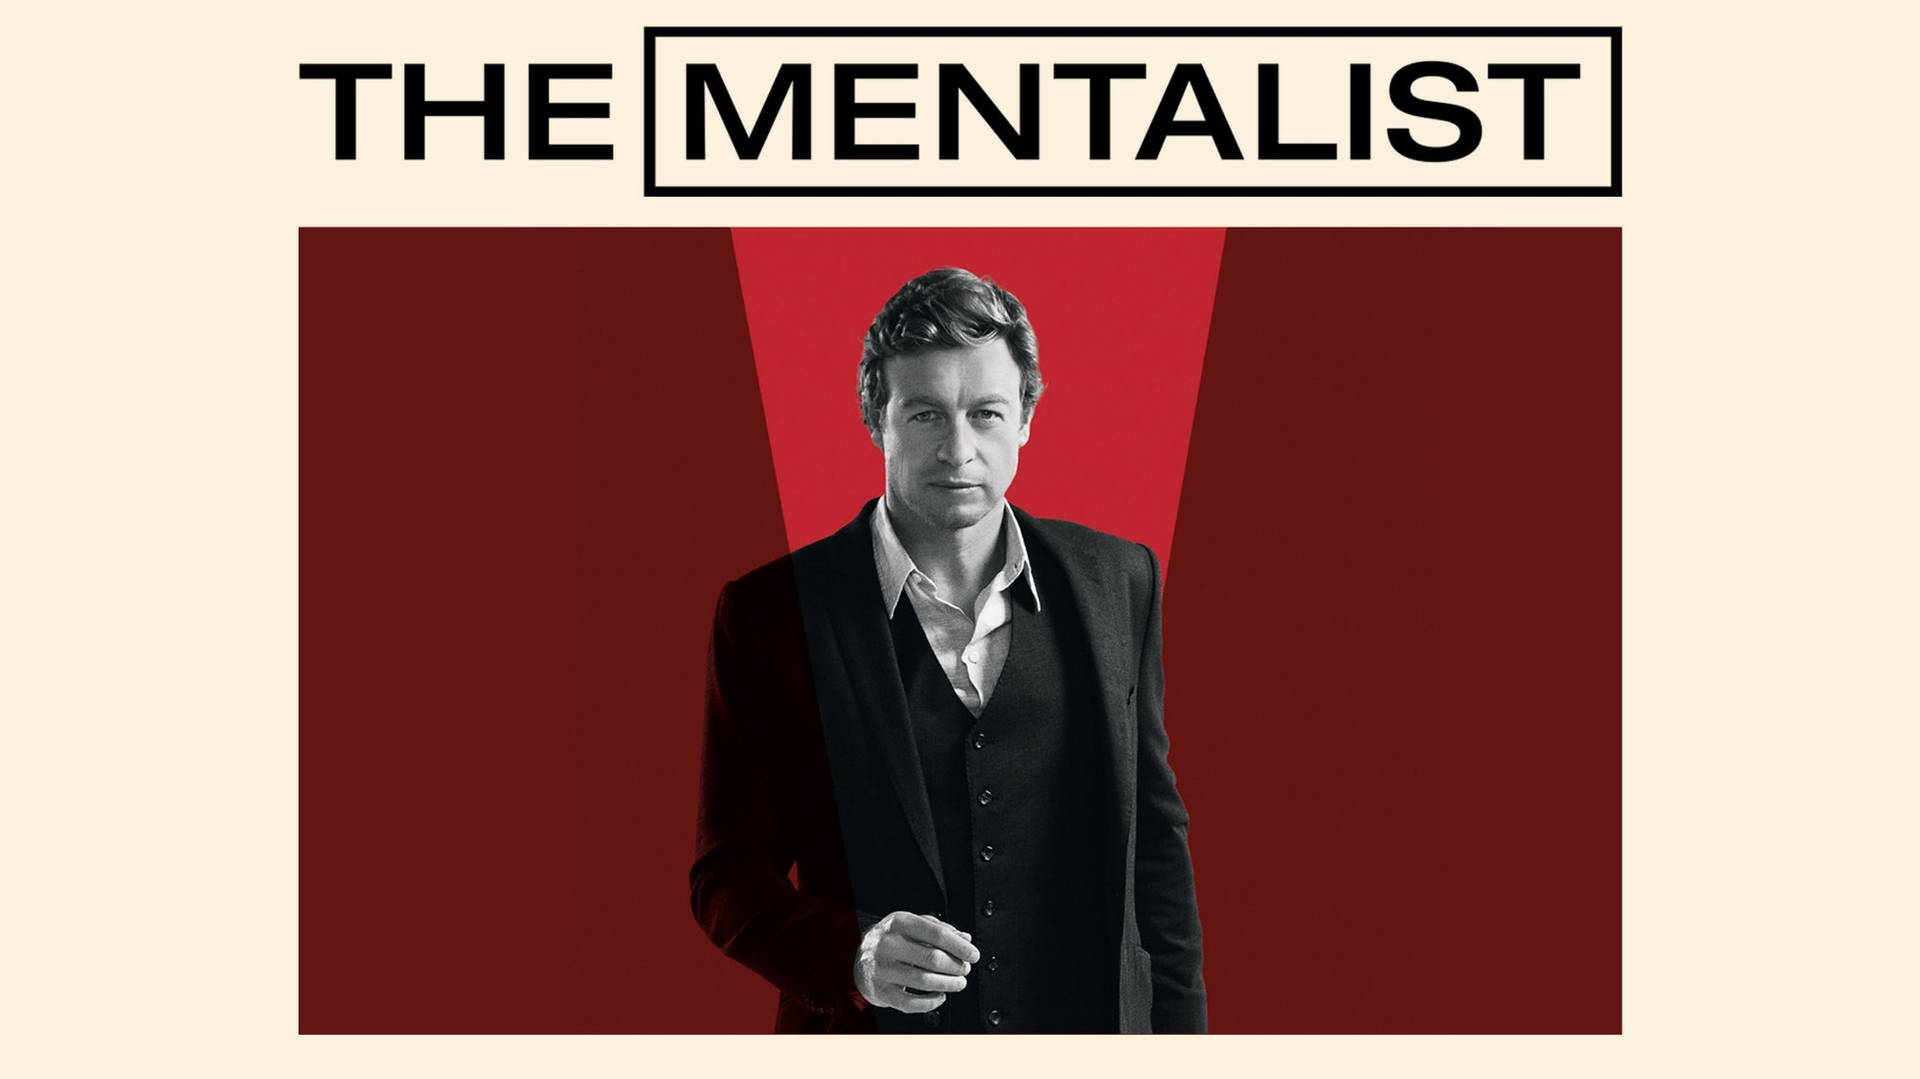 The Mentalist Television Series Poster With Simon Baker Background